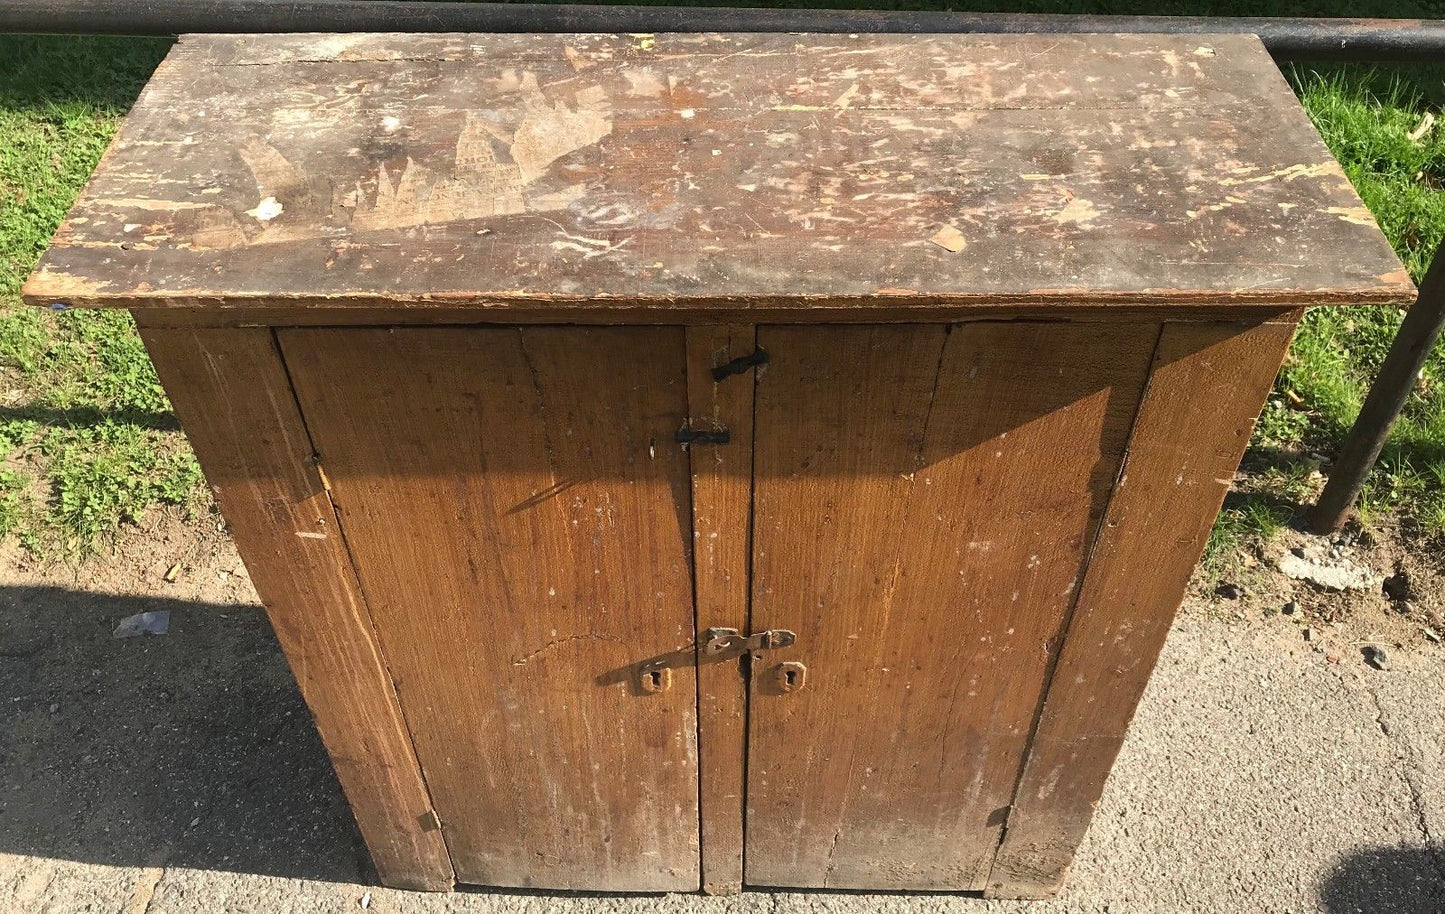 EARLY 19TH C. PRIMITIVE JELLY CUPBOARD IN ORIGINAL BITTERSWEET PAINT SURFACE